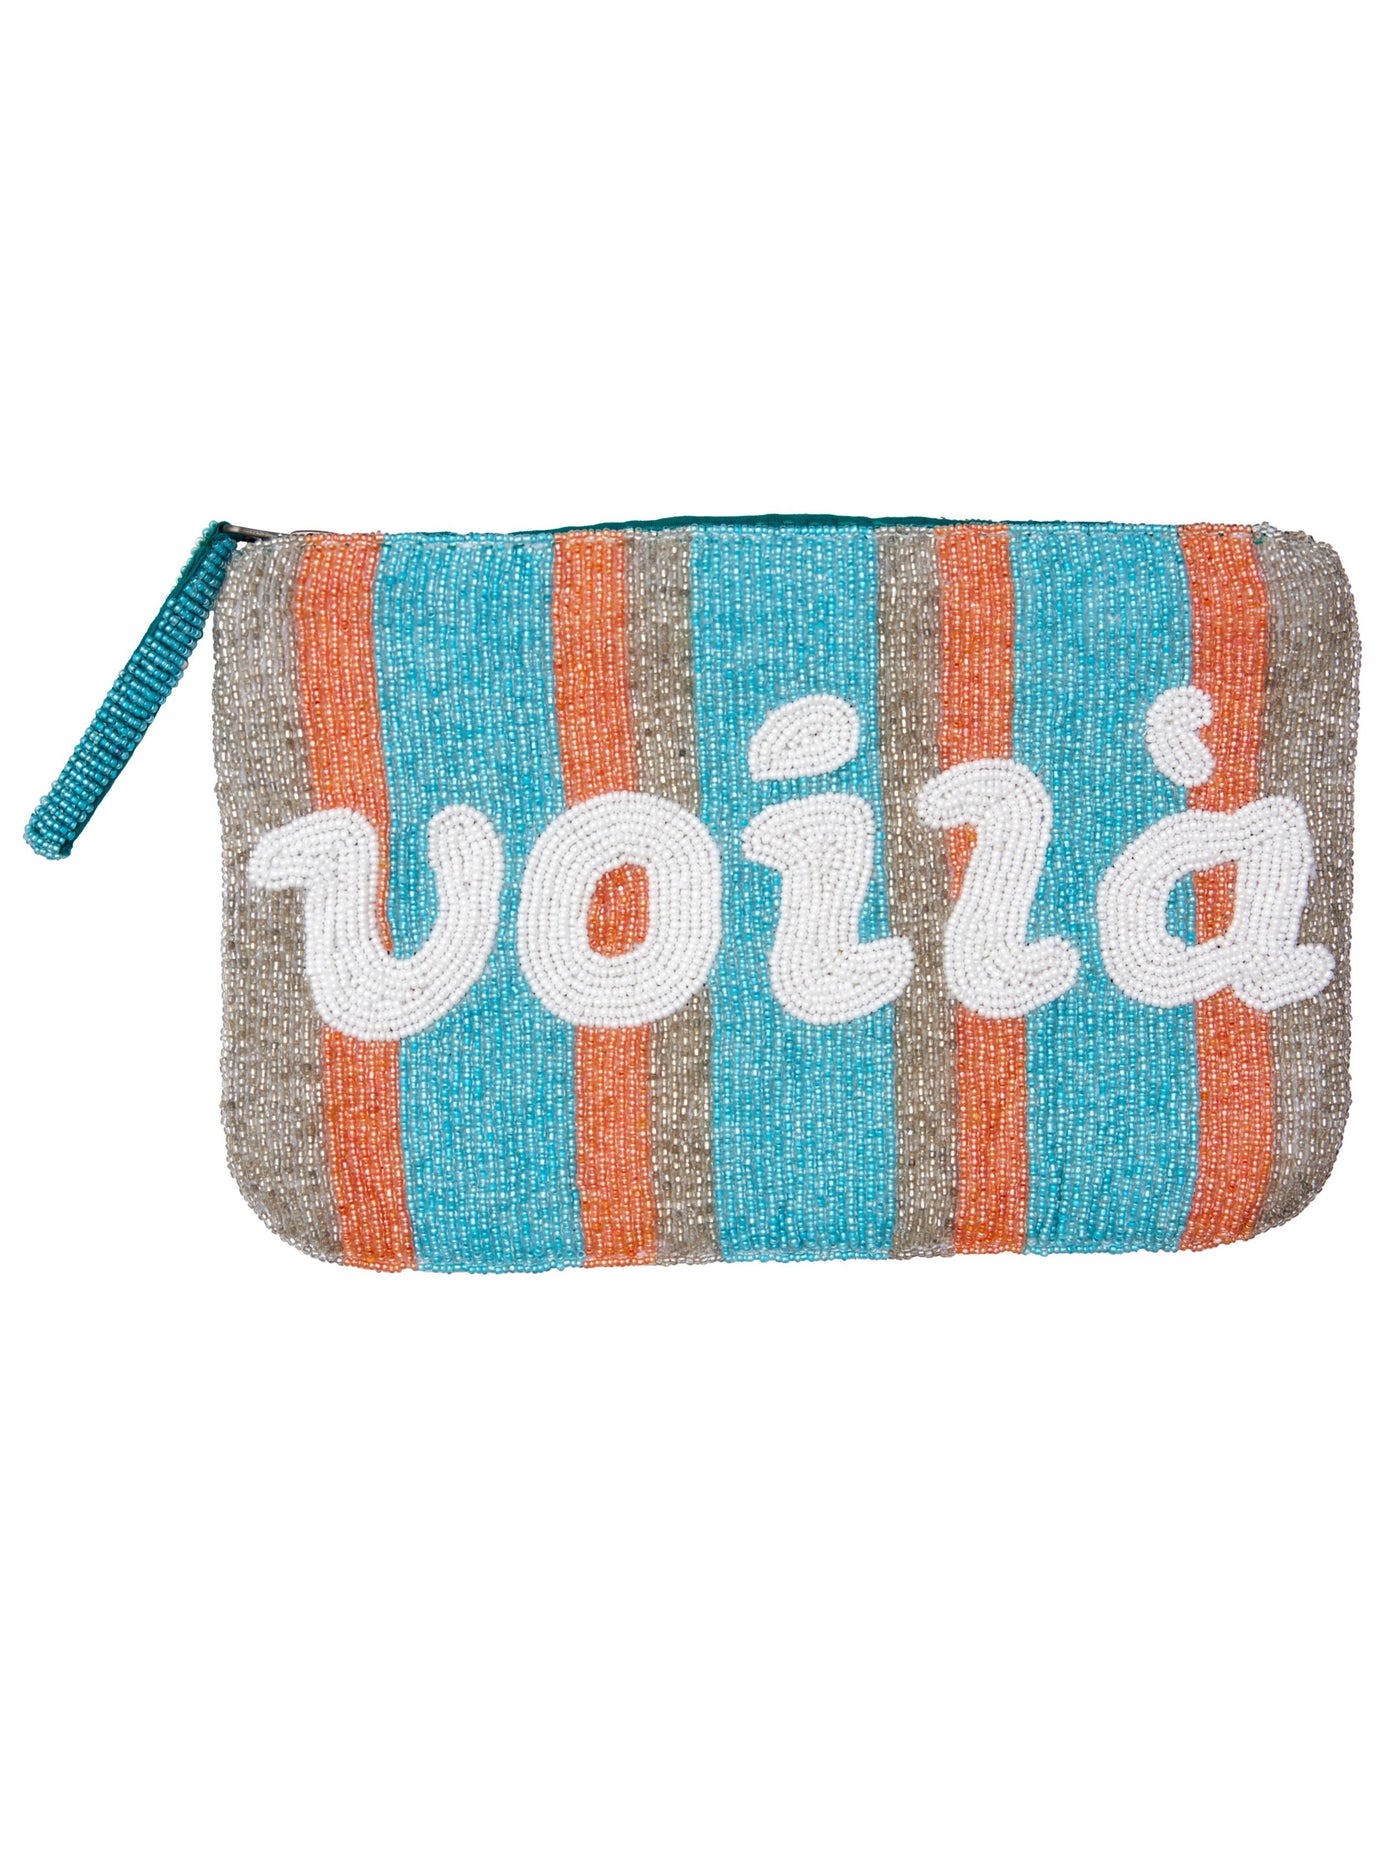 Voila bead clutch - Silver, Blue, Pink and White